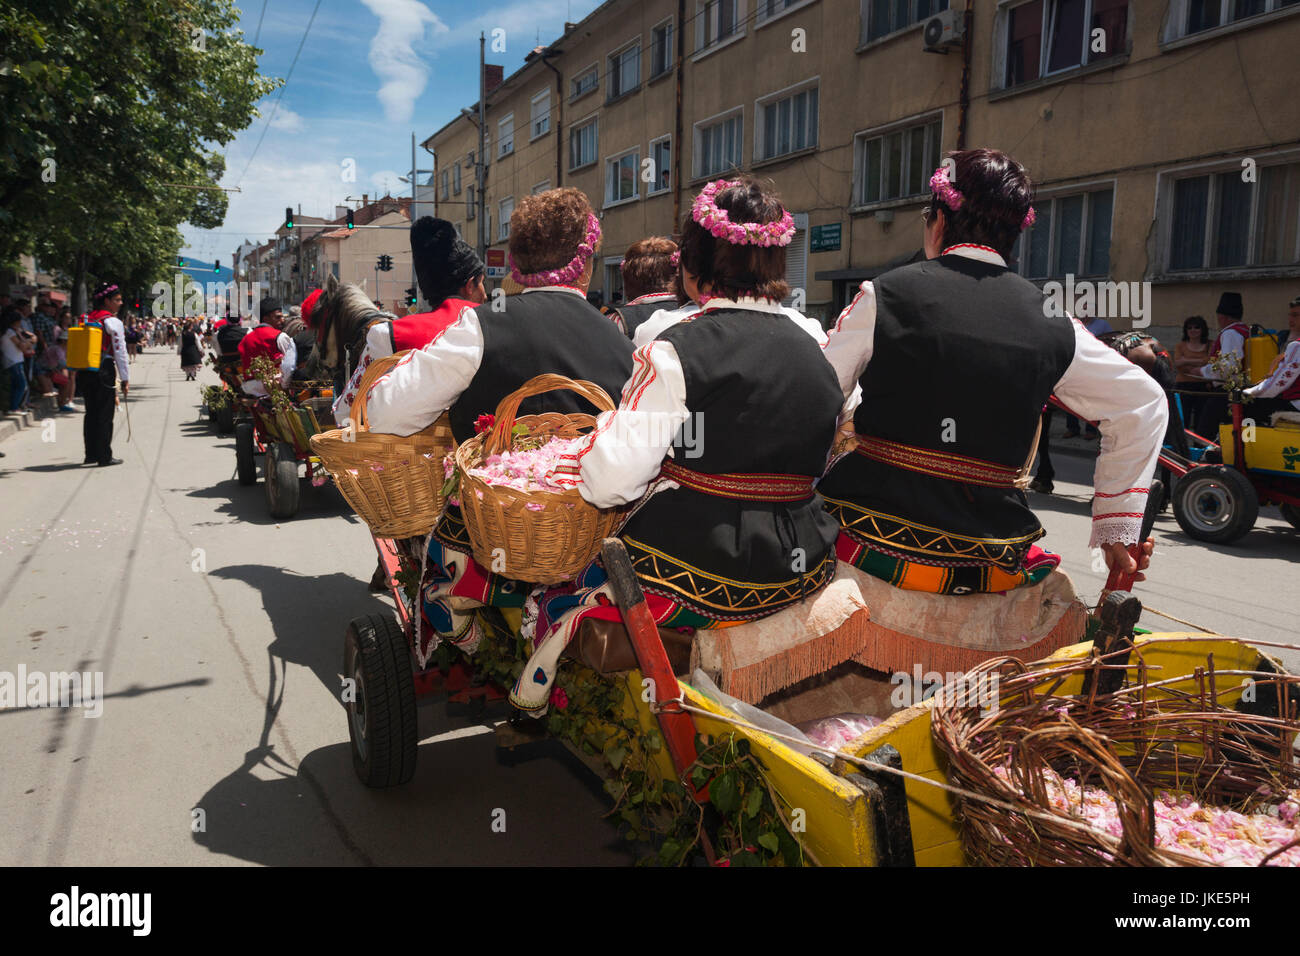 Bulgaria, Central Mountains, Kazanlak, Kazanlak Rose Festival, town produces 60% of the world's rose oil, Rose Parade, people in horse-drawn rose wagons, NR Stock Photo